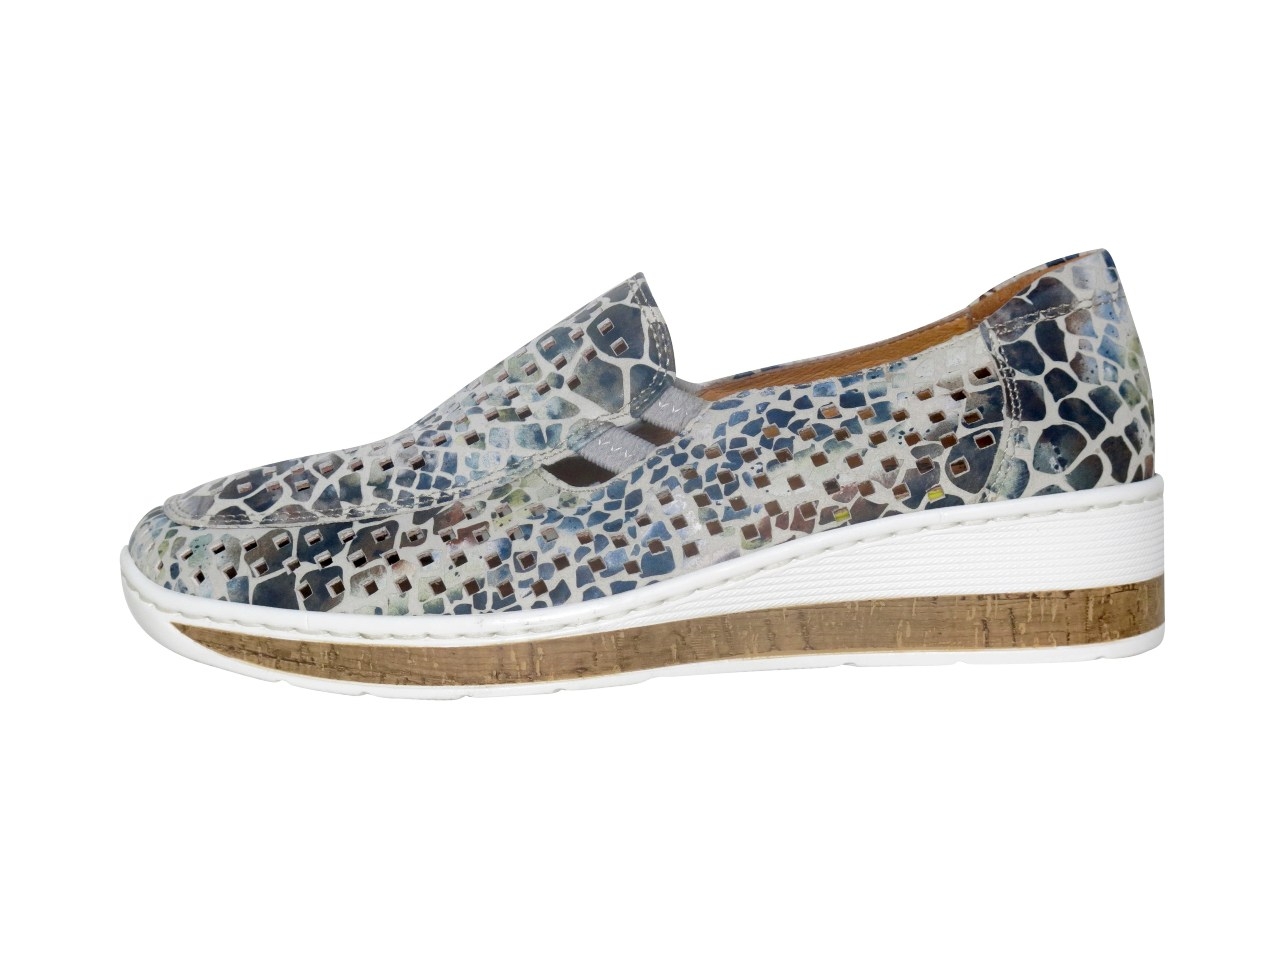 MONKEY CASSINI - WOMENS SHOES-SHOES - low to flat : Shirley's Shoes ...